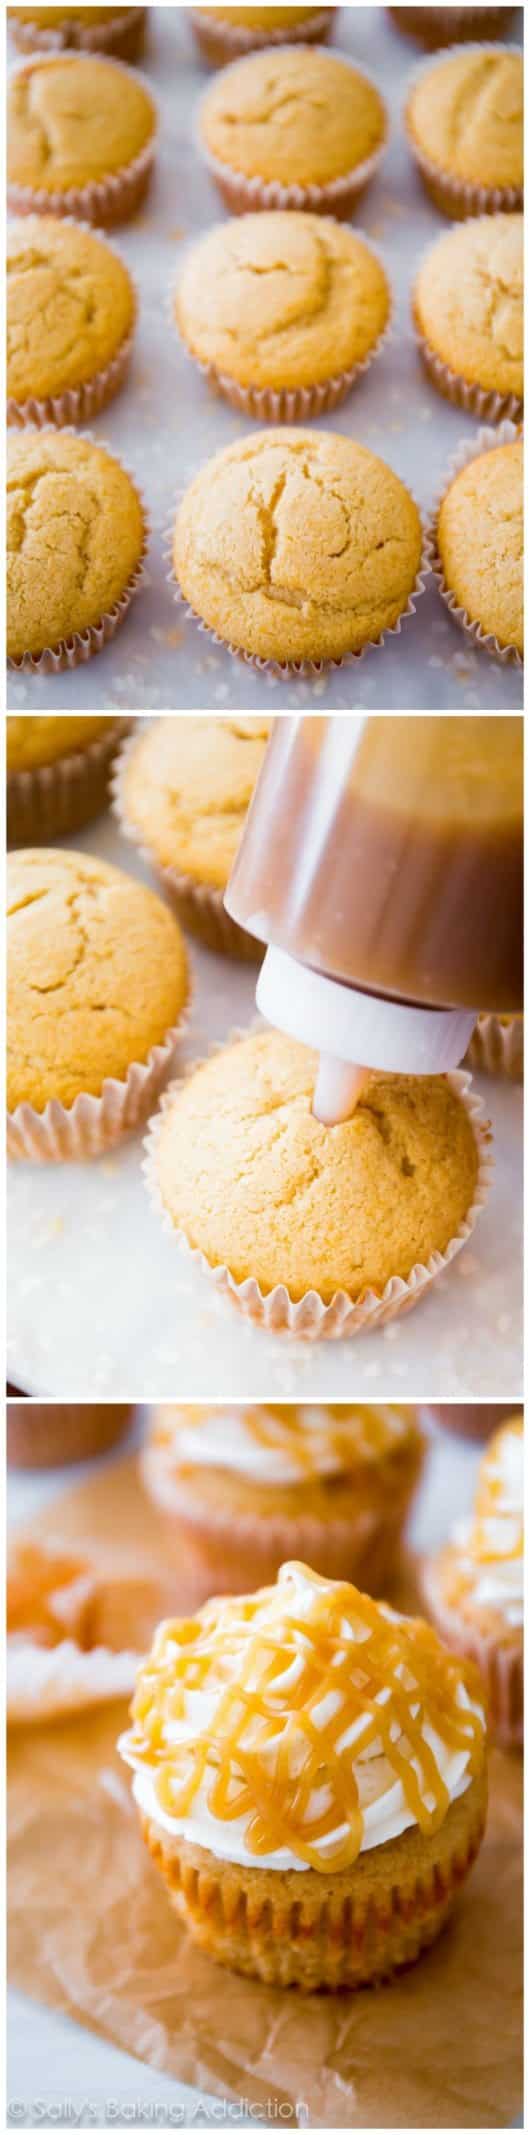 3 images showing how to make butterscotch filled brown sugar cupcakes